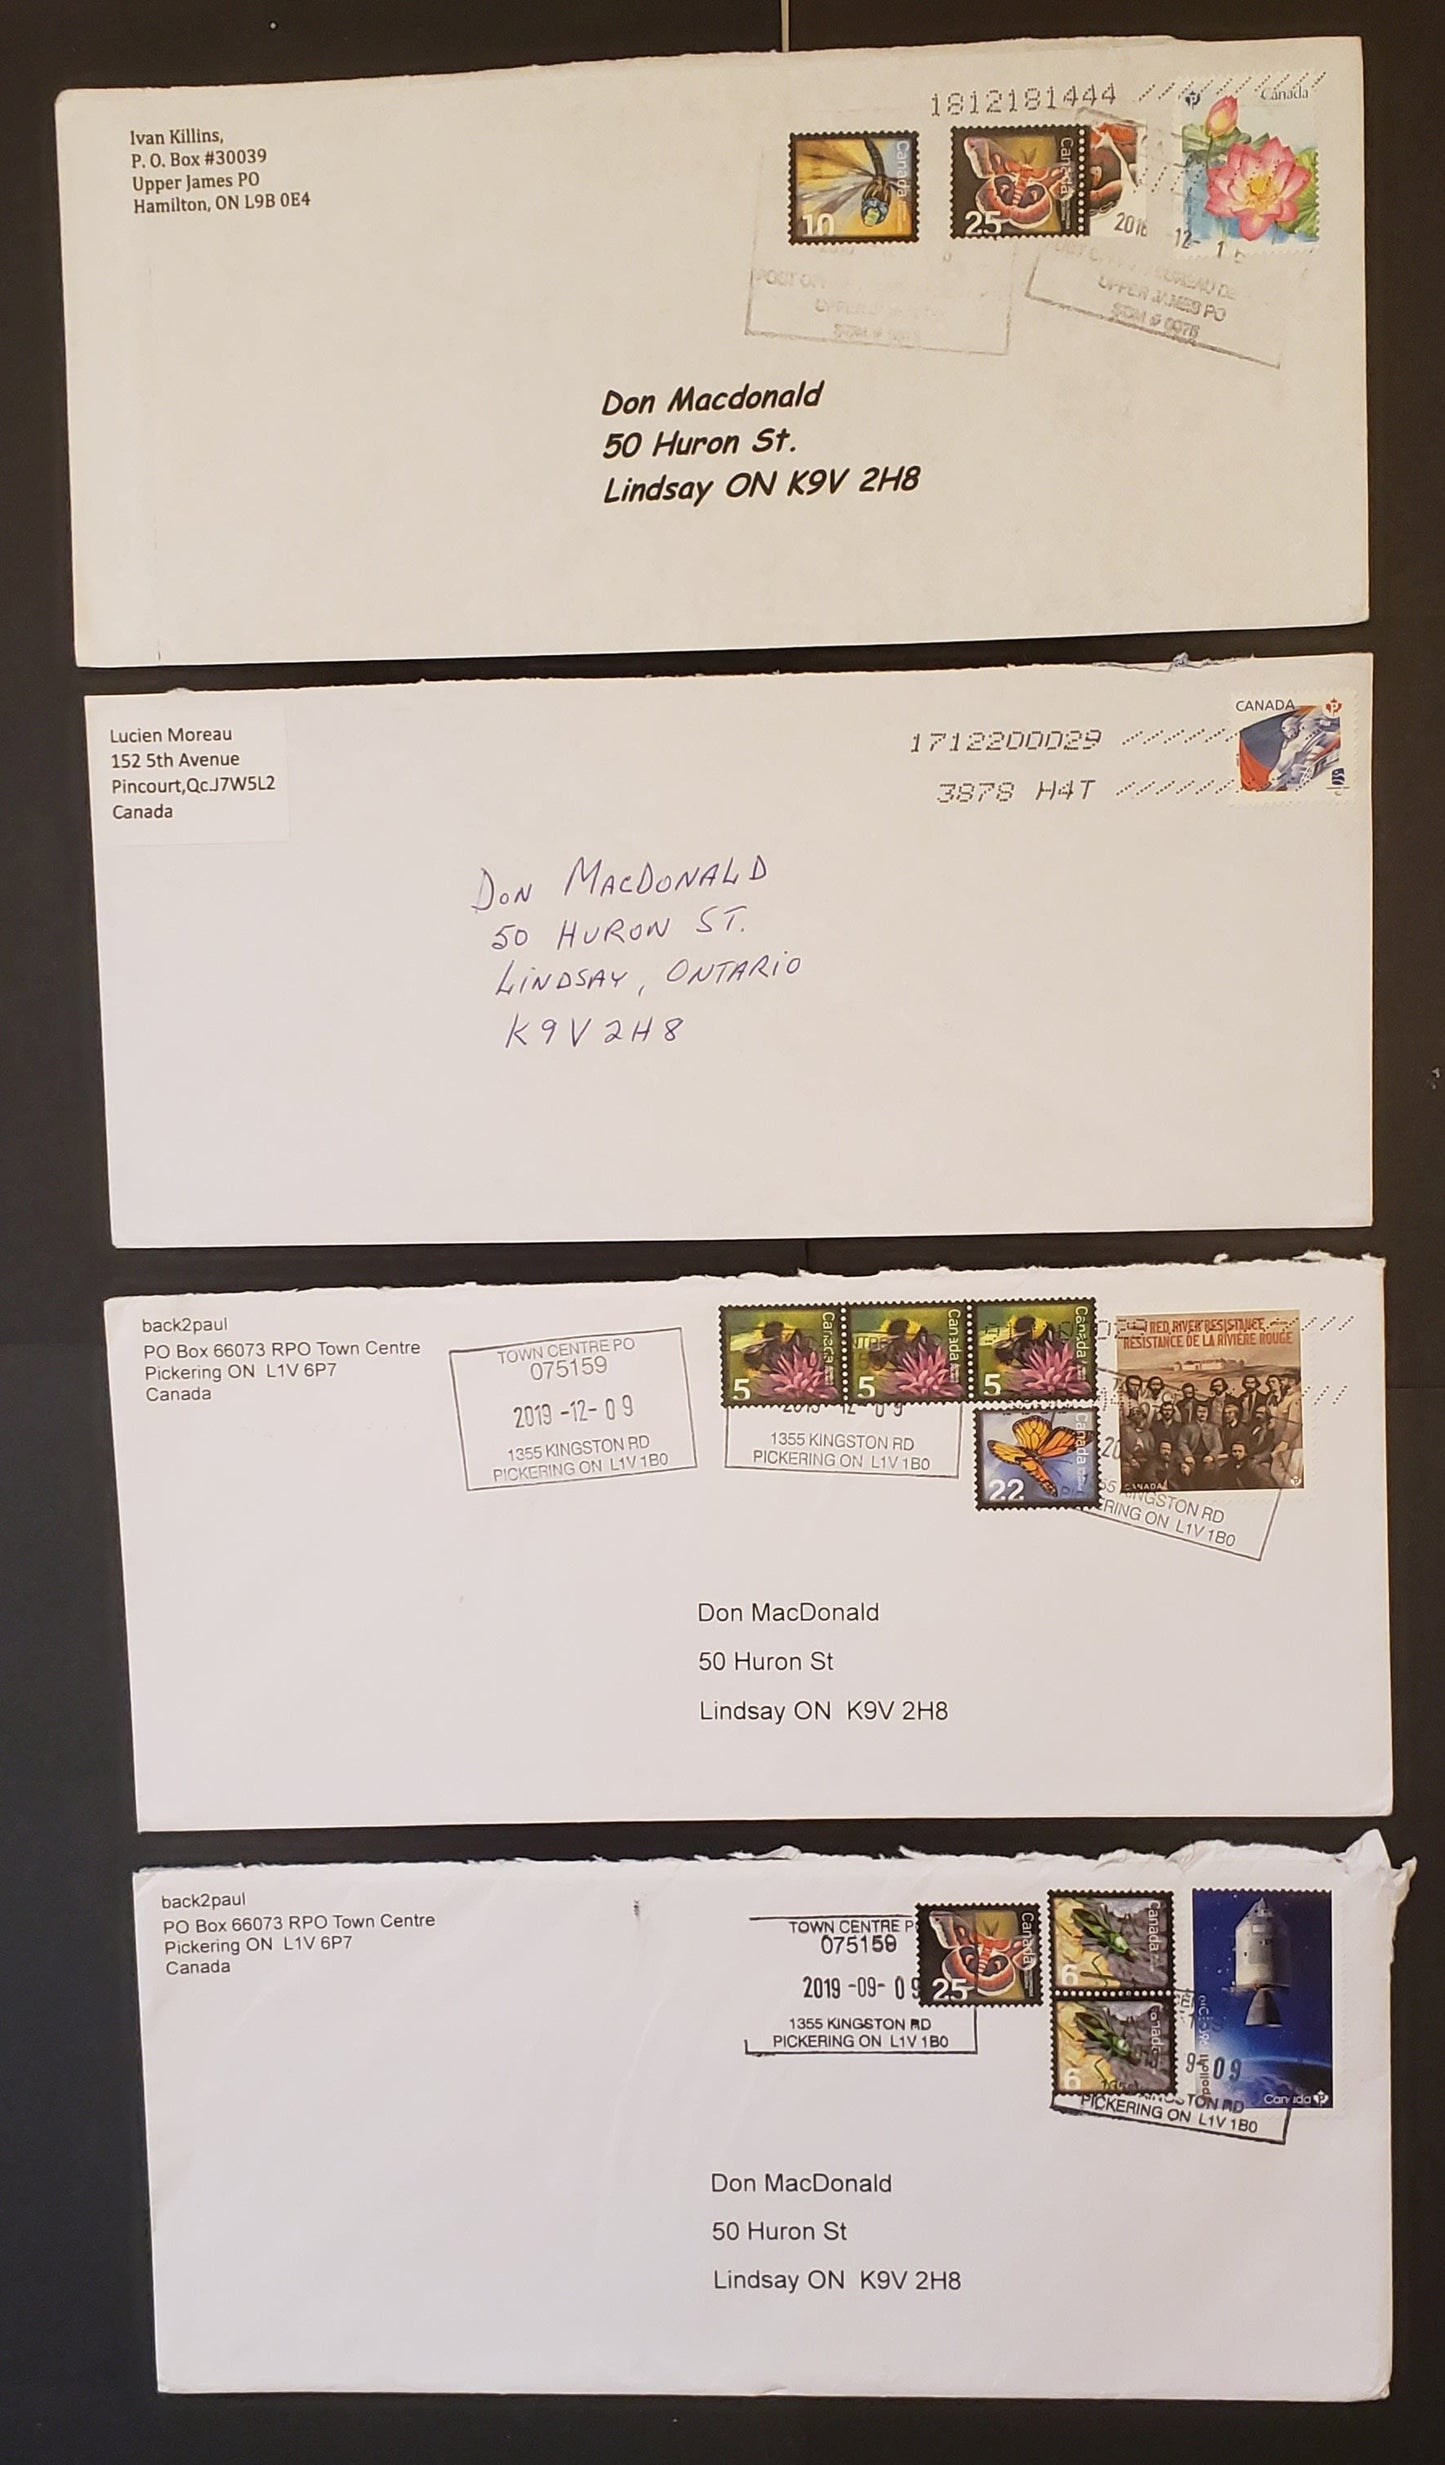 Lot 106  Canada #2234/2307 1c-P(54c) Multicoloured Various Designs 2007-2009 Definitives & Commemoratives, 11 Commerical Covers Franked With Combination Singles To Pay Regular & Oversized Rates Cat. Value $15-25